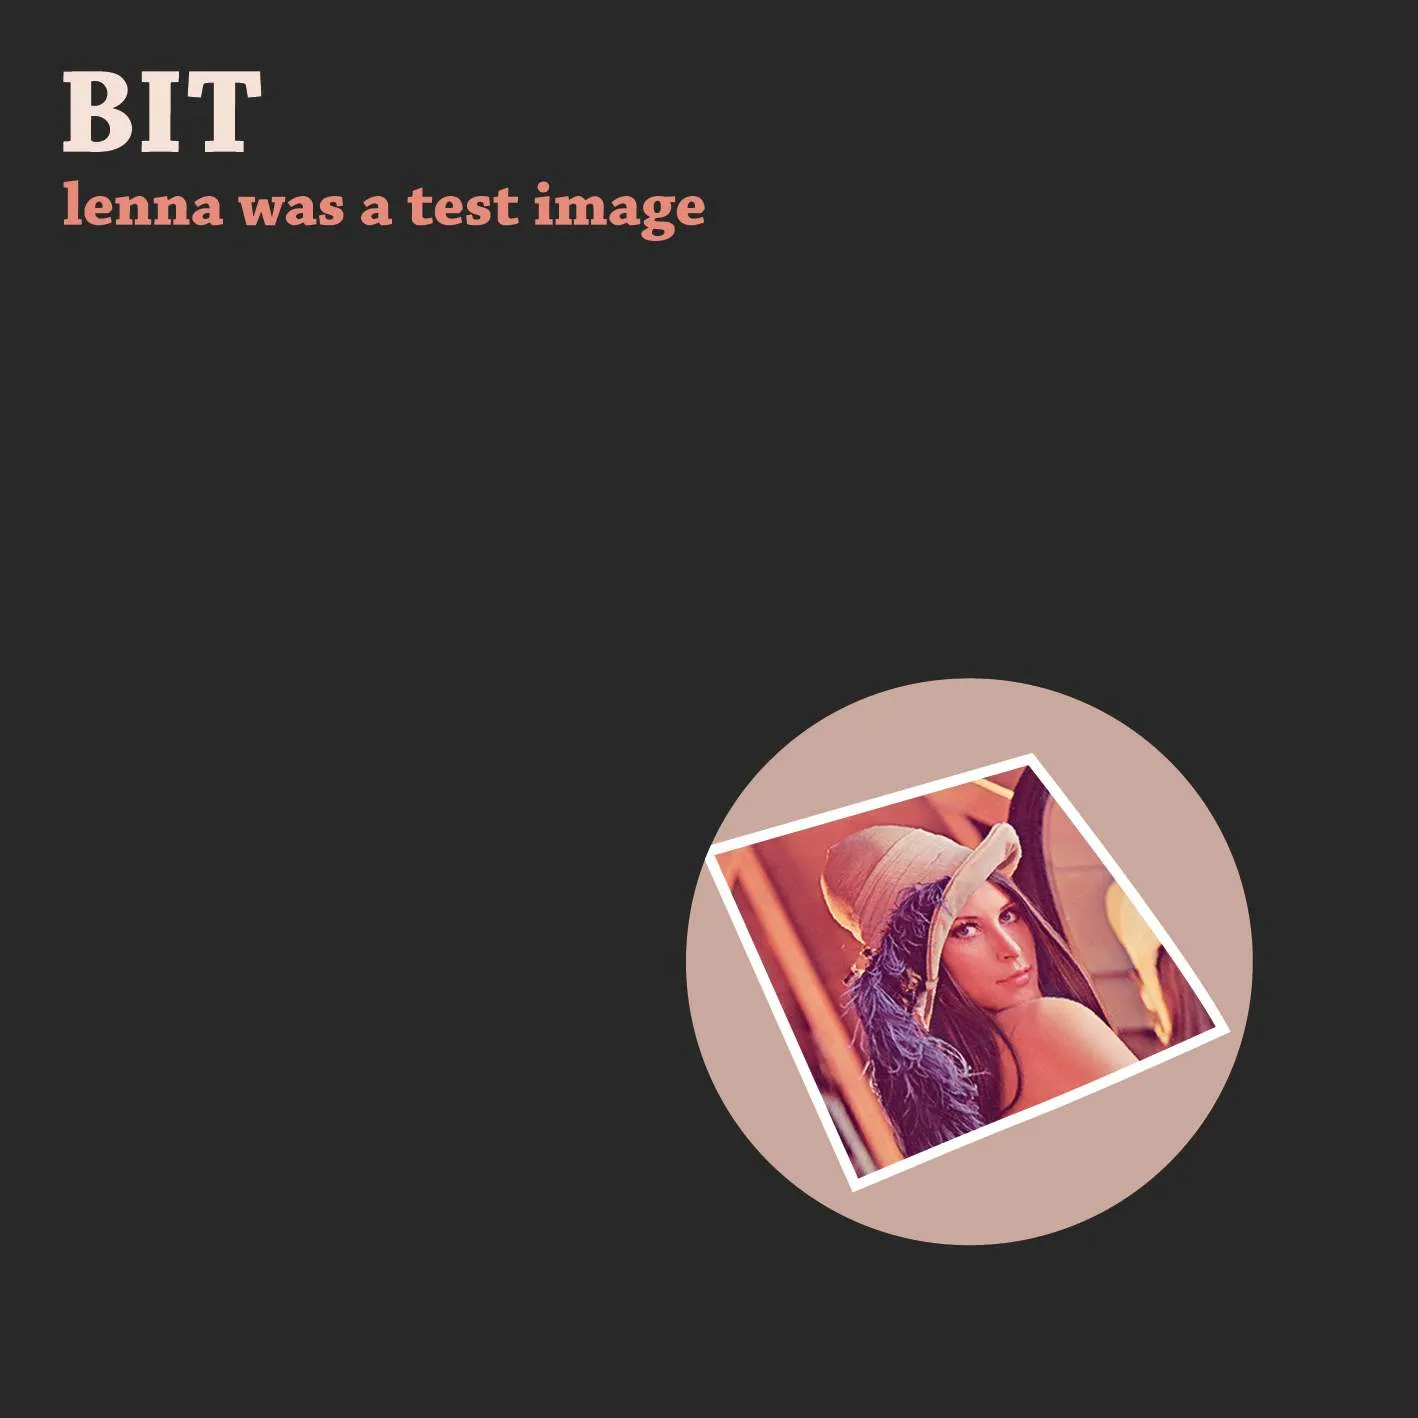 Album cover for “lenna was a test image” by BIT